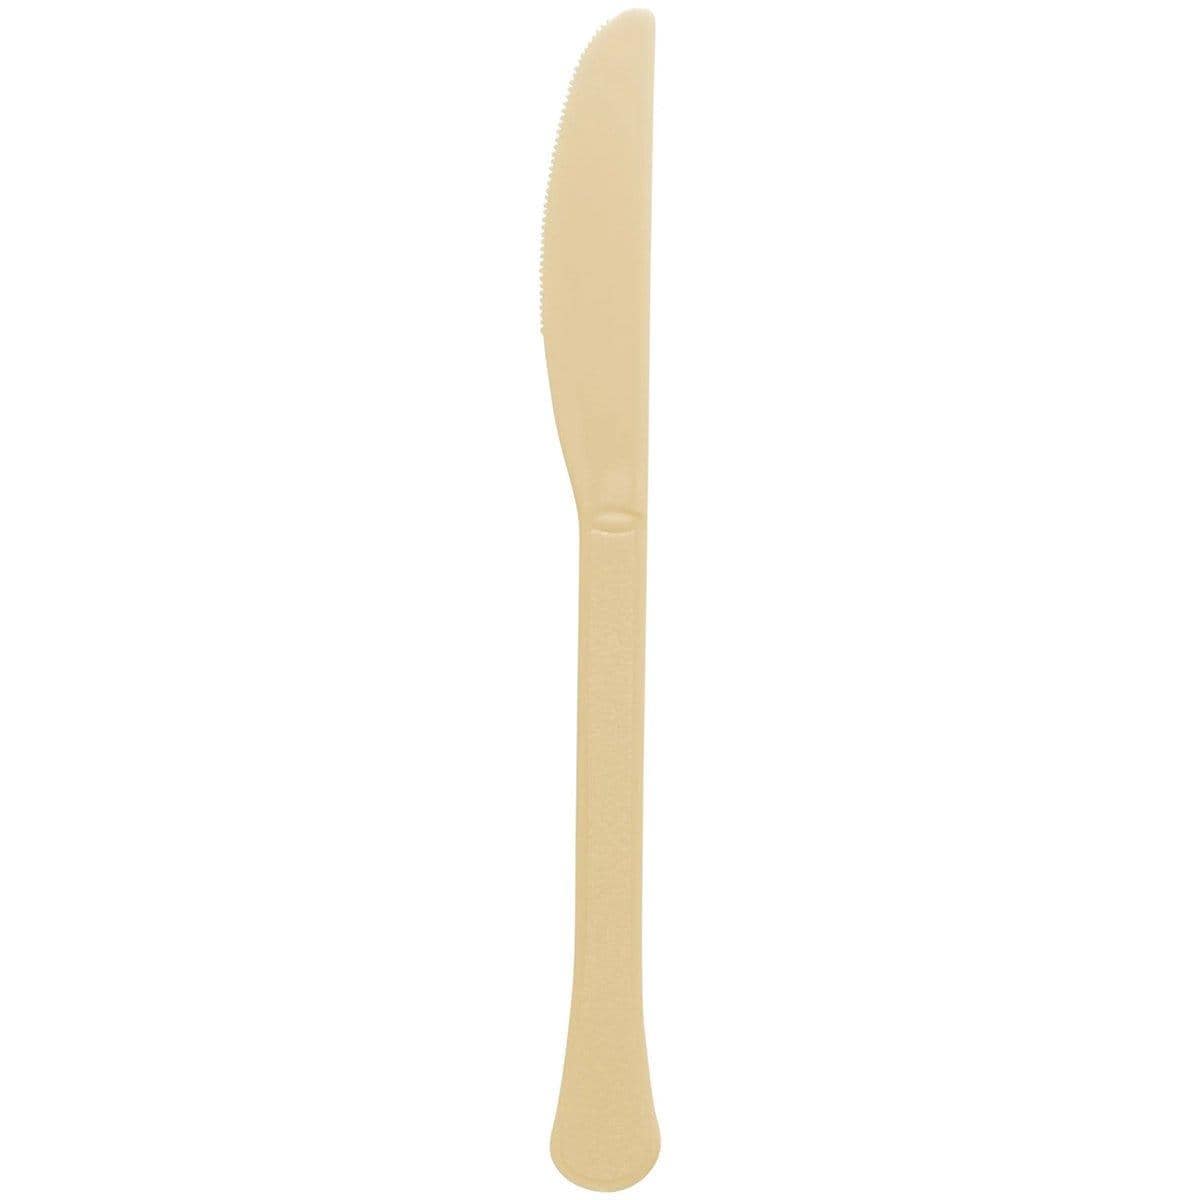 Buy Plasticware Gold Plastic Knives, 20 Count sold at Party Expert